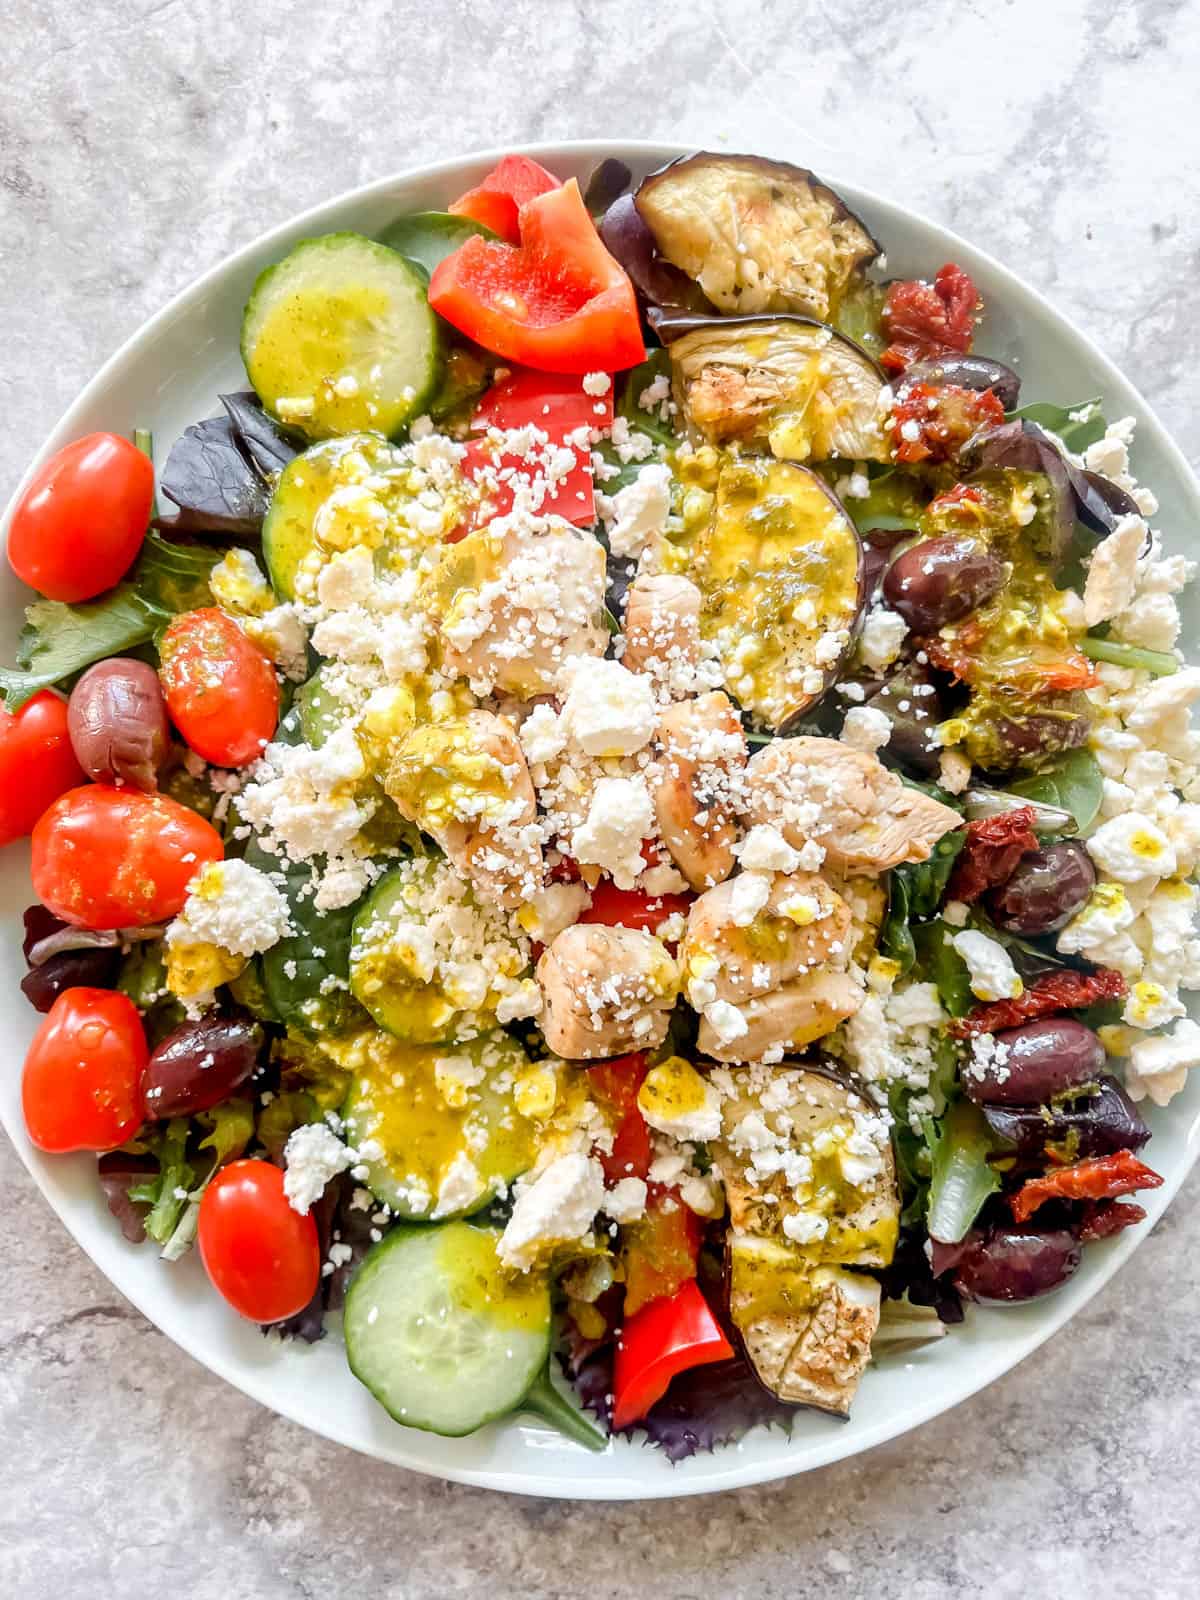 Feta and dressing added to the salad.